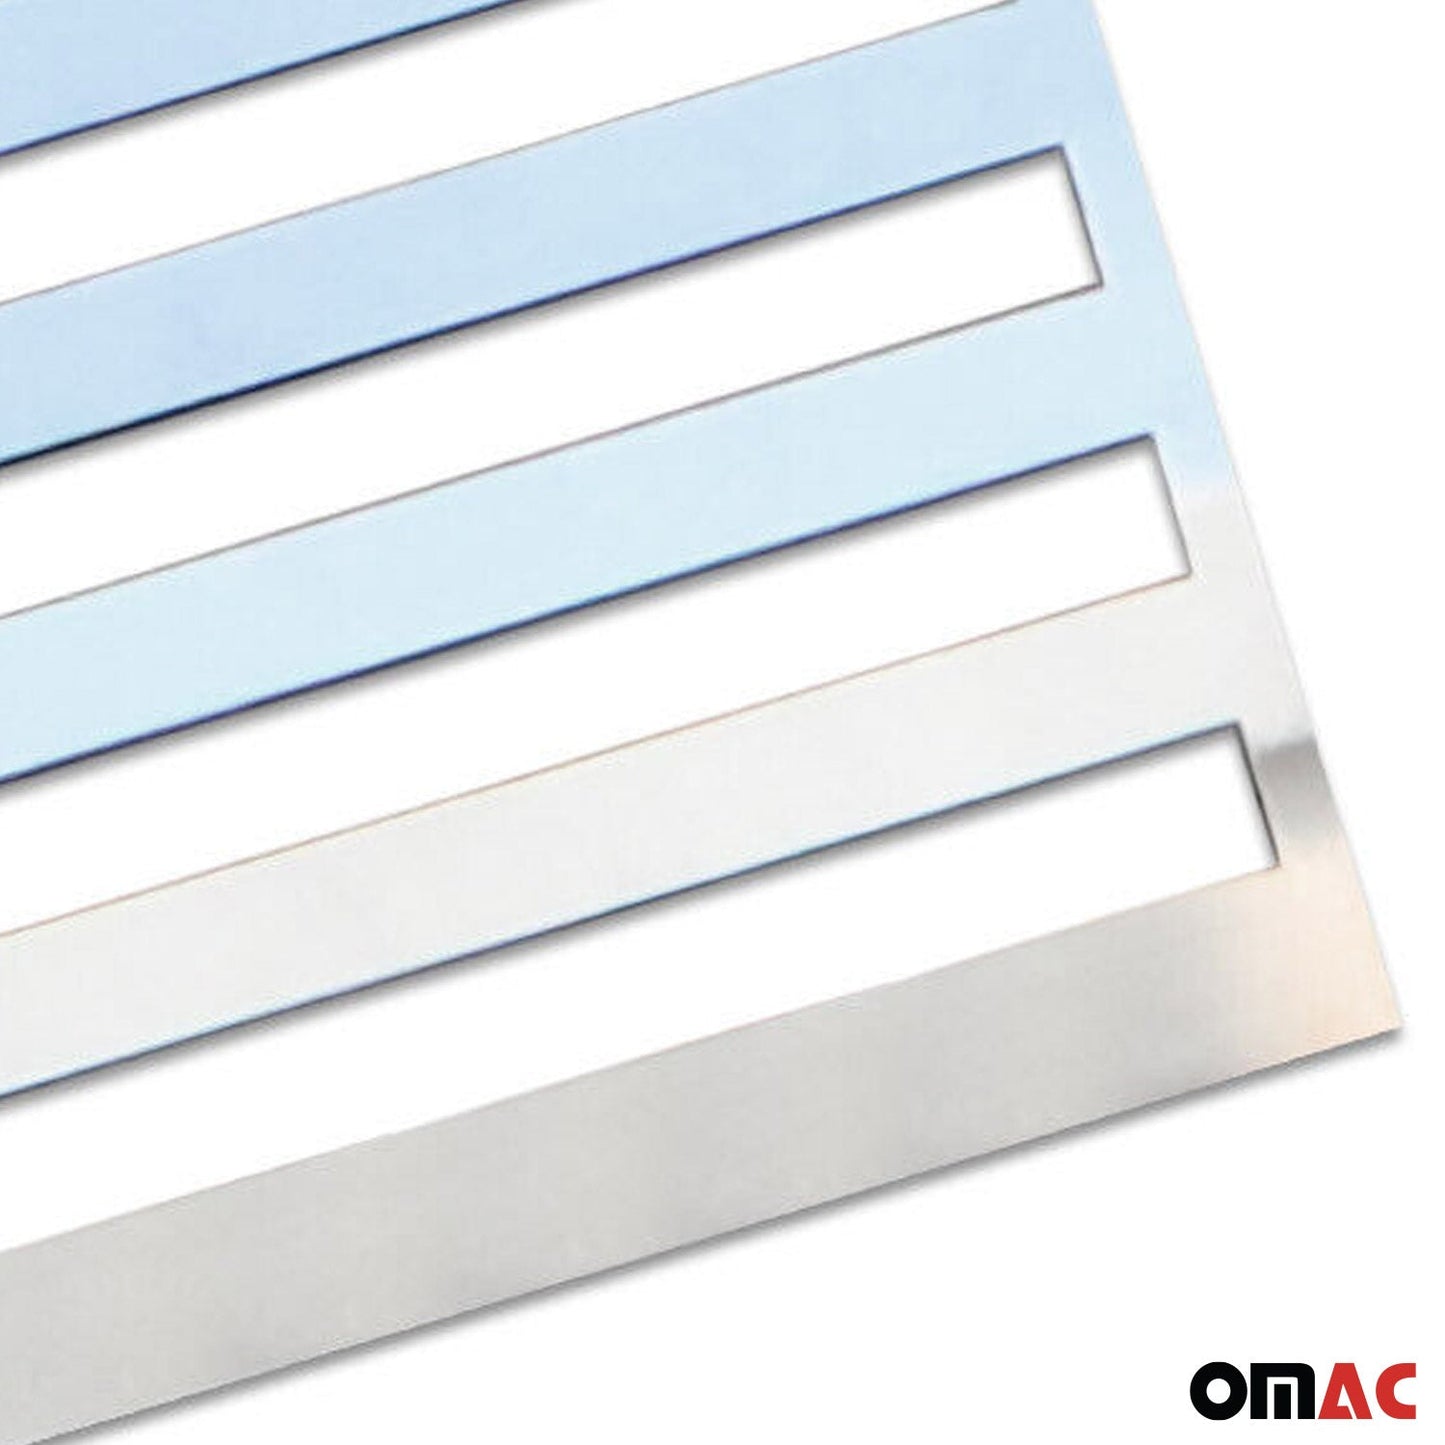 OMAC US American Flag Chrome Decal Sticker Stainless Steel for Hummer H1 H2 H3 H3T U020234